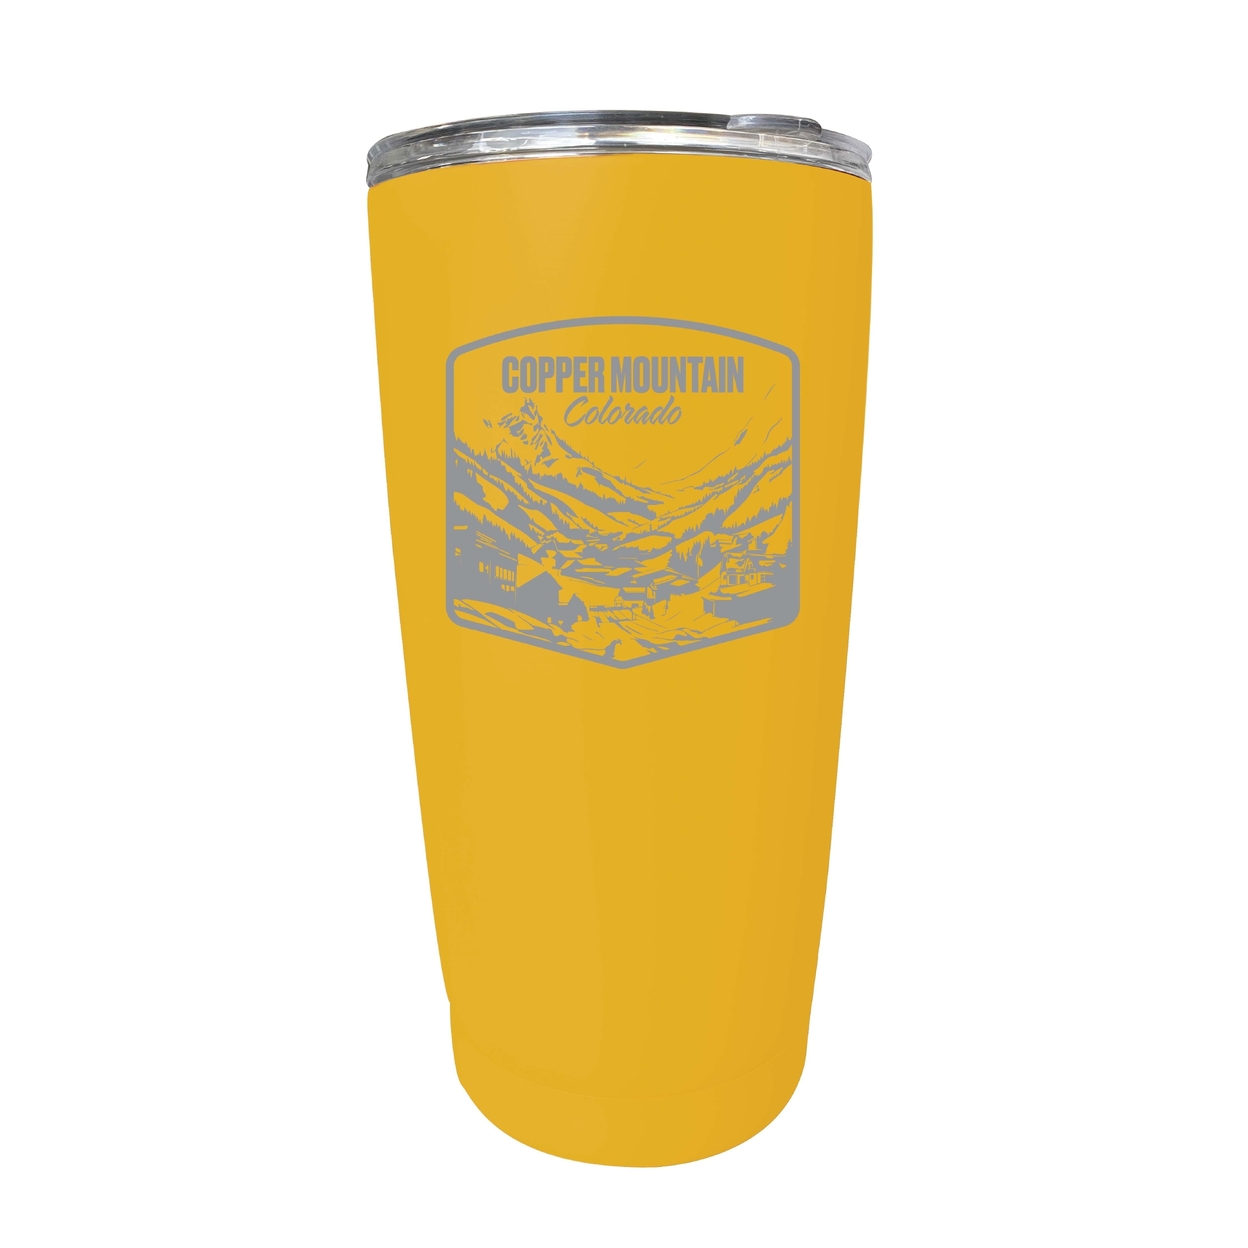 Copper Mountain Souvenir 16 Oz Engraved Insulated Tumbler - Pink,,2-Pack